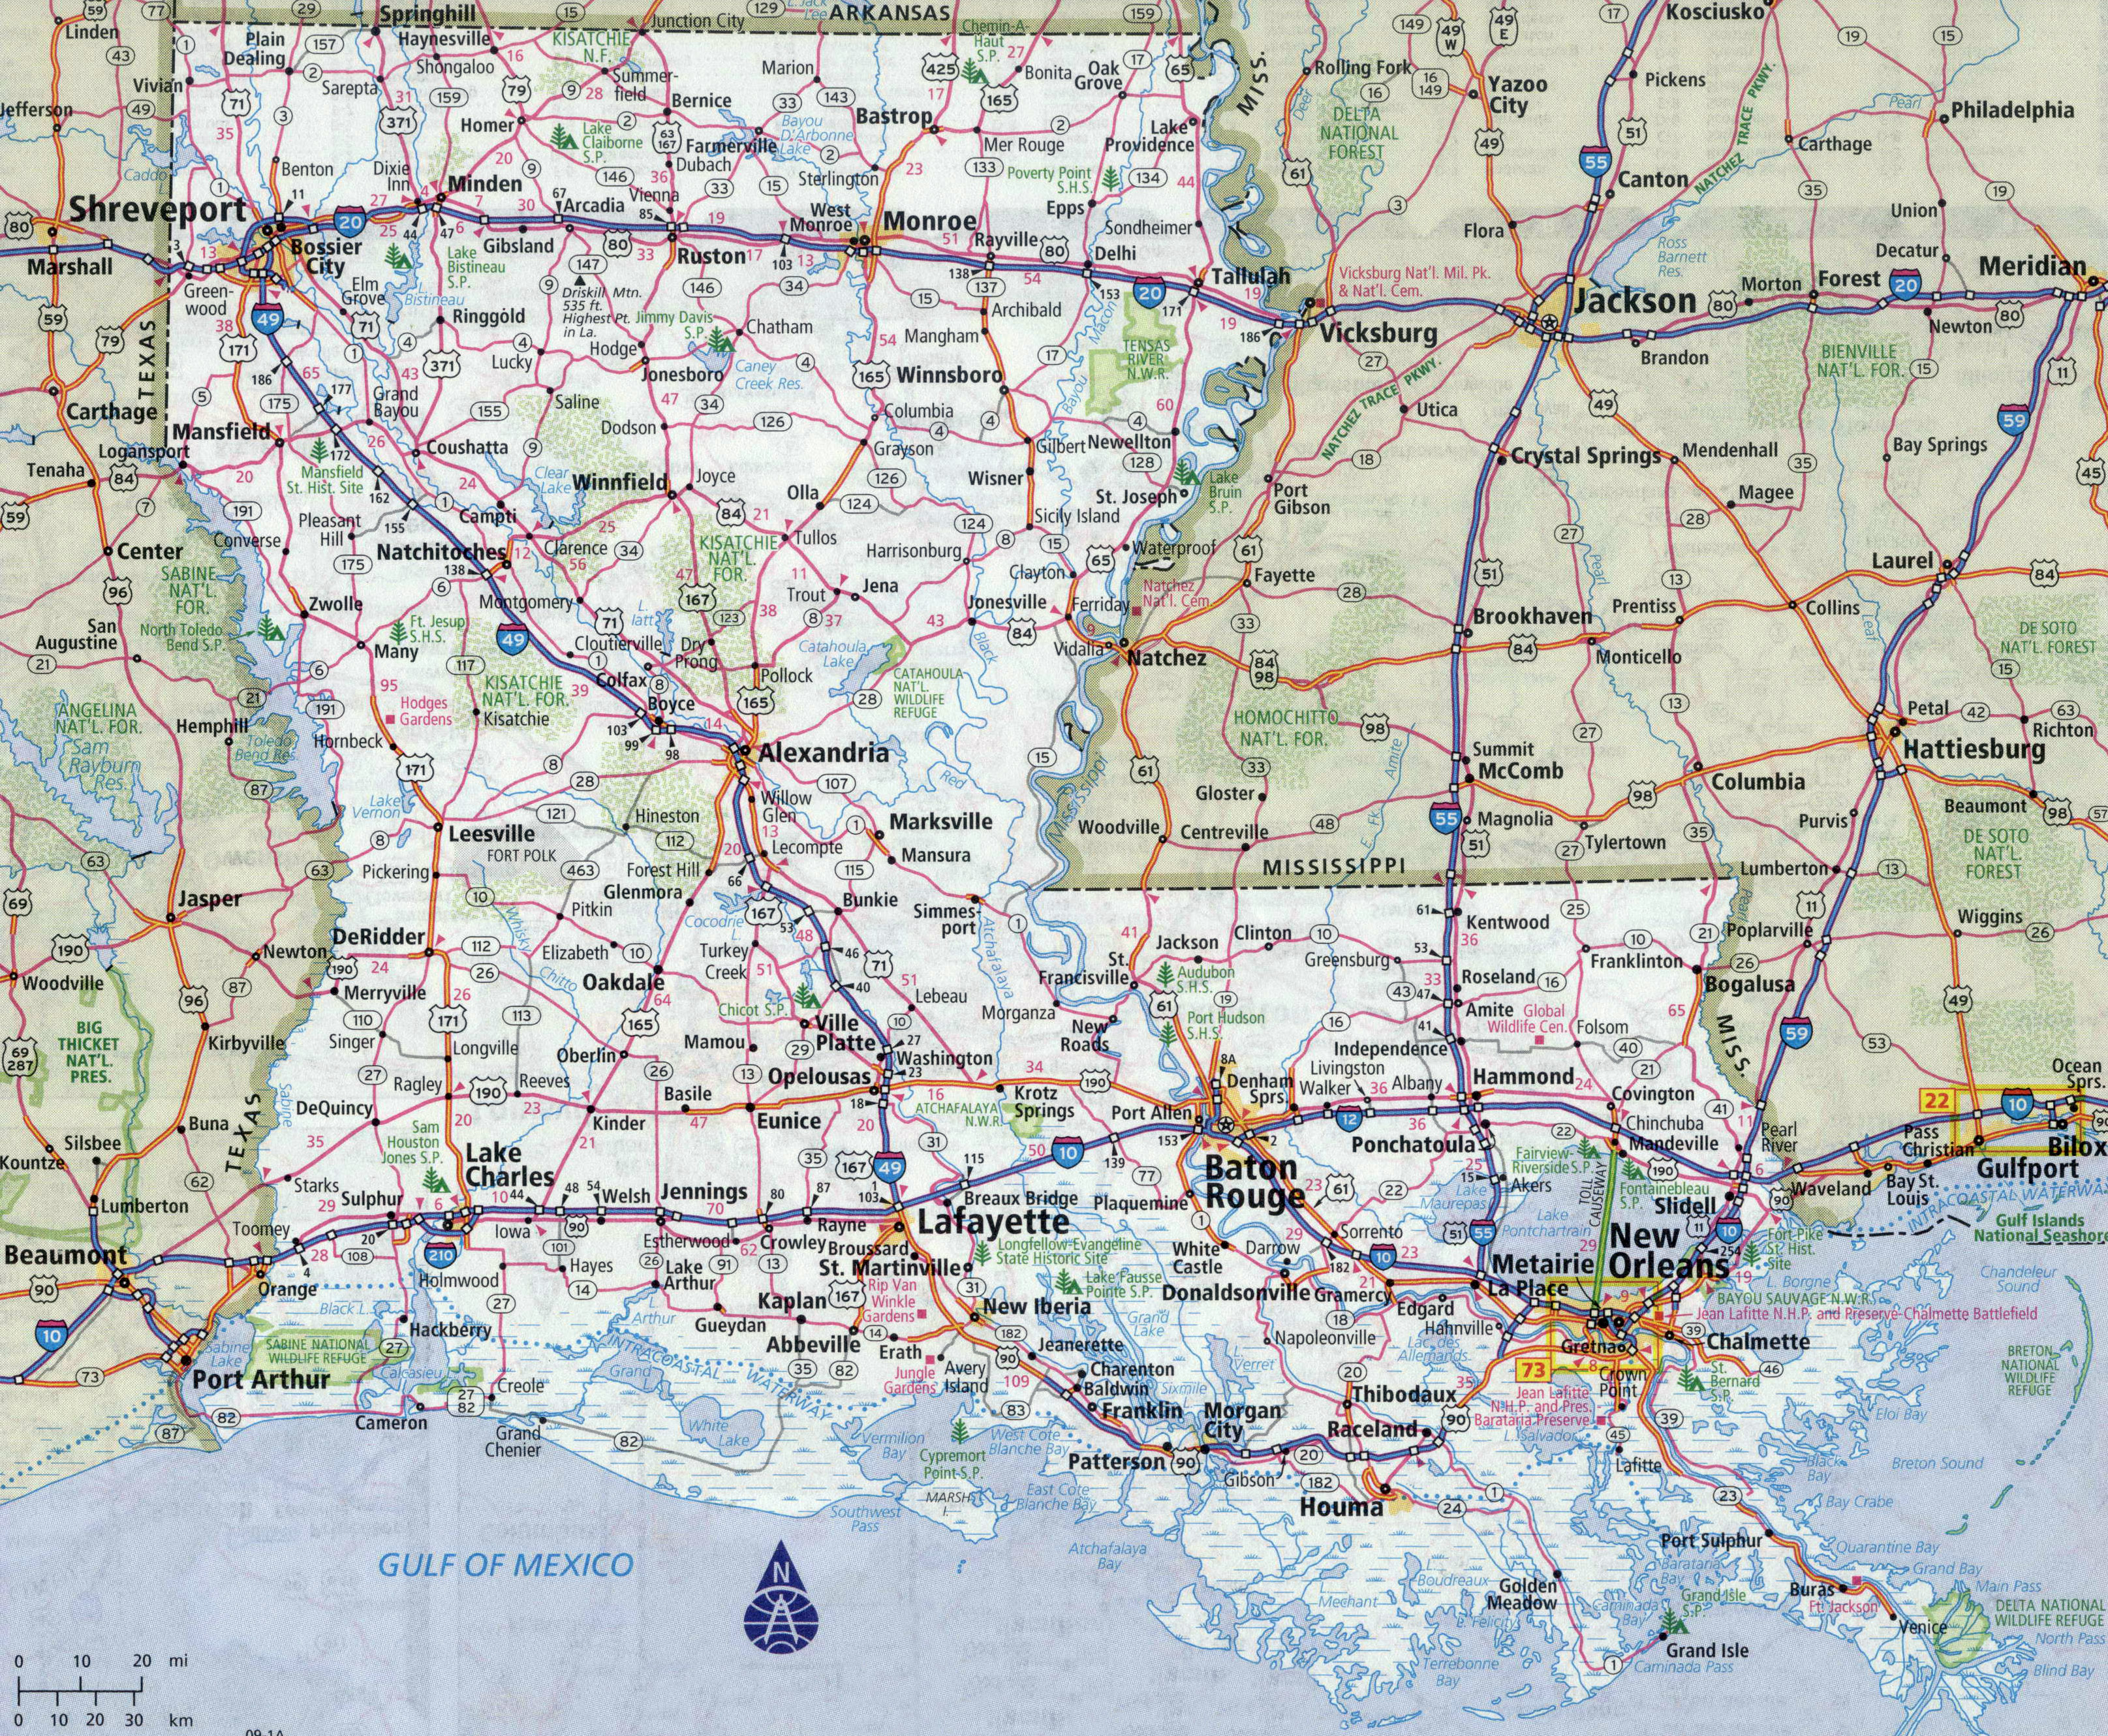 Detailed Map Of Louisiana Large detailed roads and highways map of Louisiana state with all 